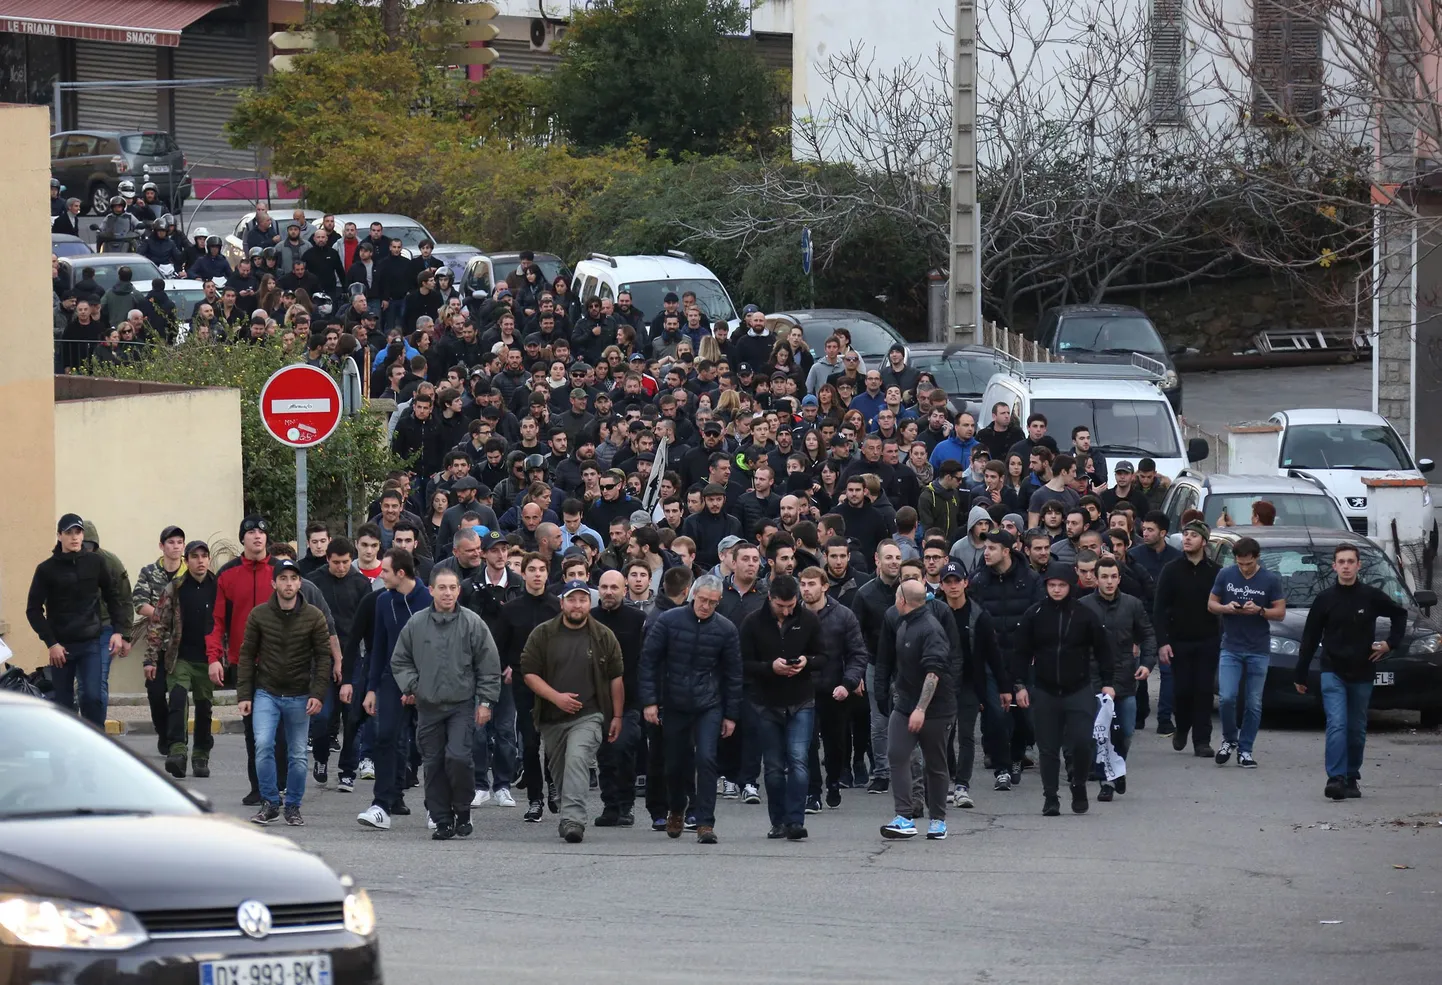 Demonstrators, most of them angry against Muslim residents, march in Ajaccio, on the French Mediterranean island of Corsica, Saturday, Dec. 26, 2015.  A crowd vandalized a Muslim prayer room in Corsica a day after an ambush left firefighters injured on the French island. (AP Photo/Jean-Pierre Belzit)